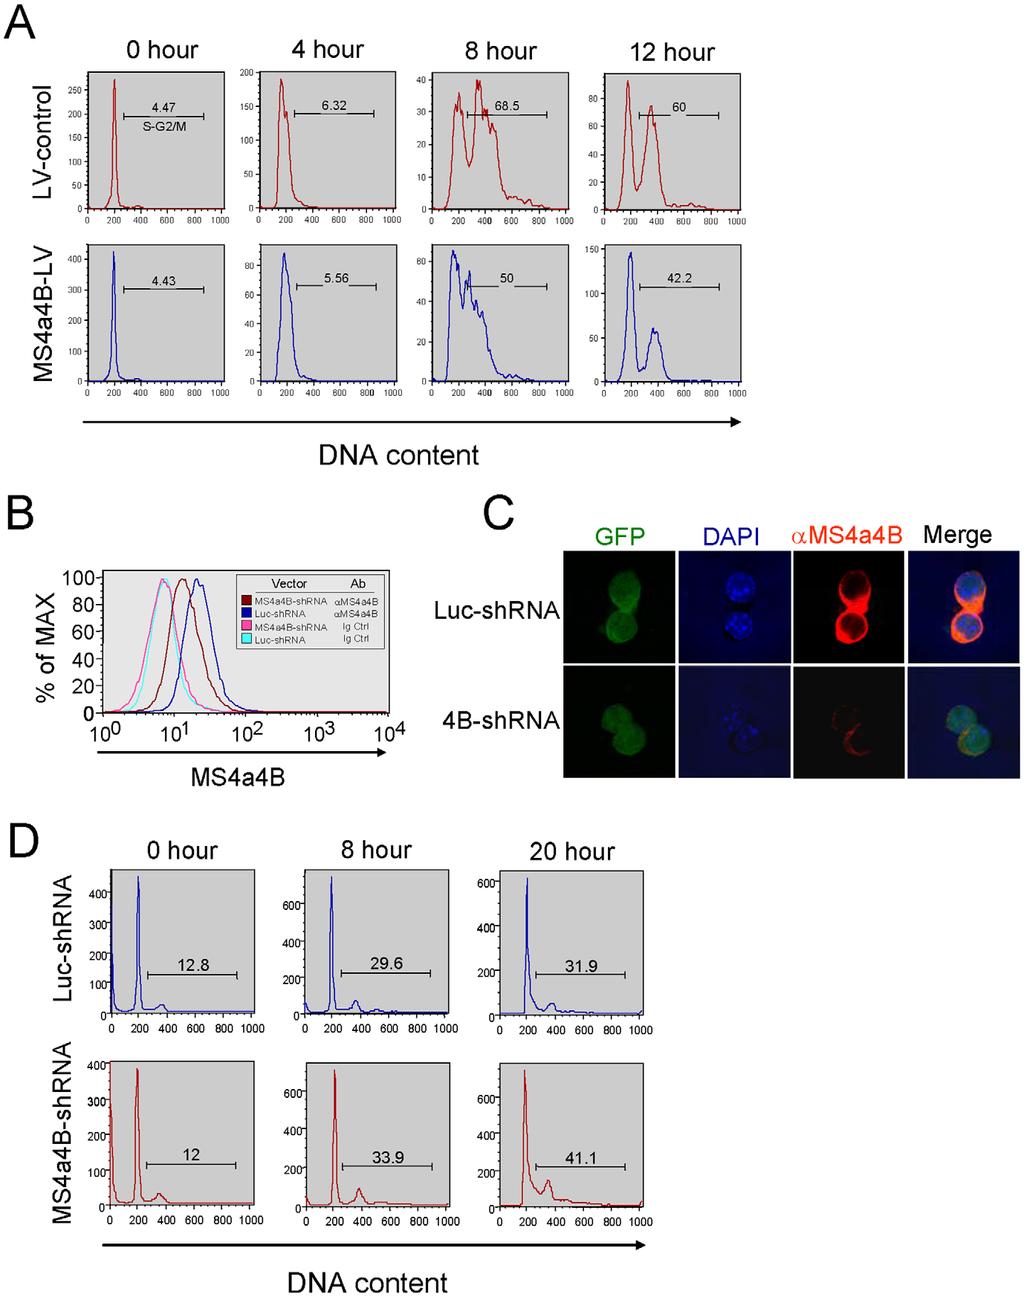 Figure 4. Expression of MS4a4B in T cells modulates cell cycle progression. A, MS4a4B-LV or mock LV-infected EL4 thymoma cells were synchronized by treatments with 2.